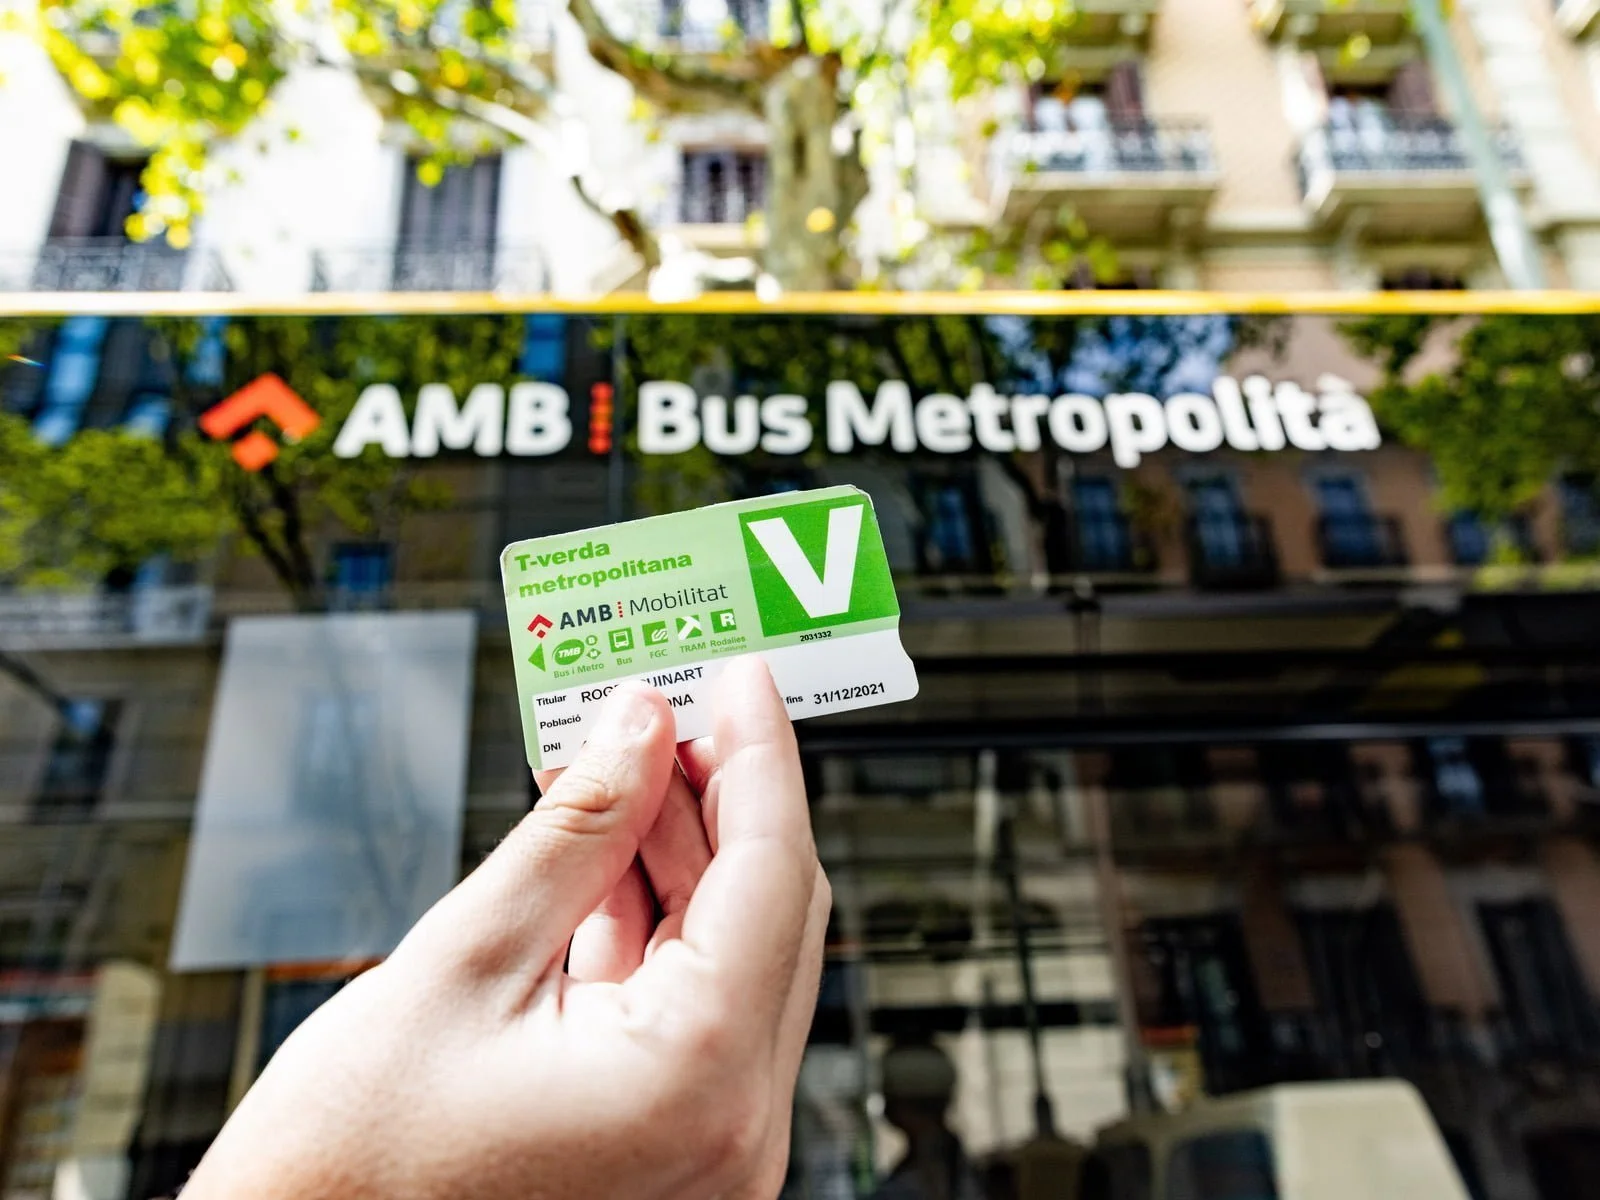 Barcelona issued 12,000 free annual public transport tickets to former car owners